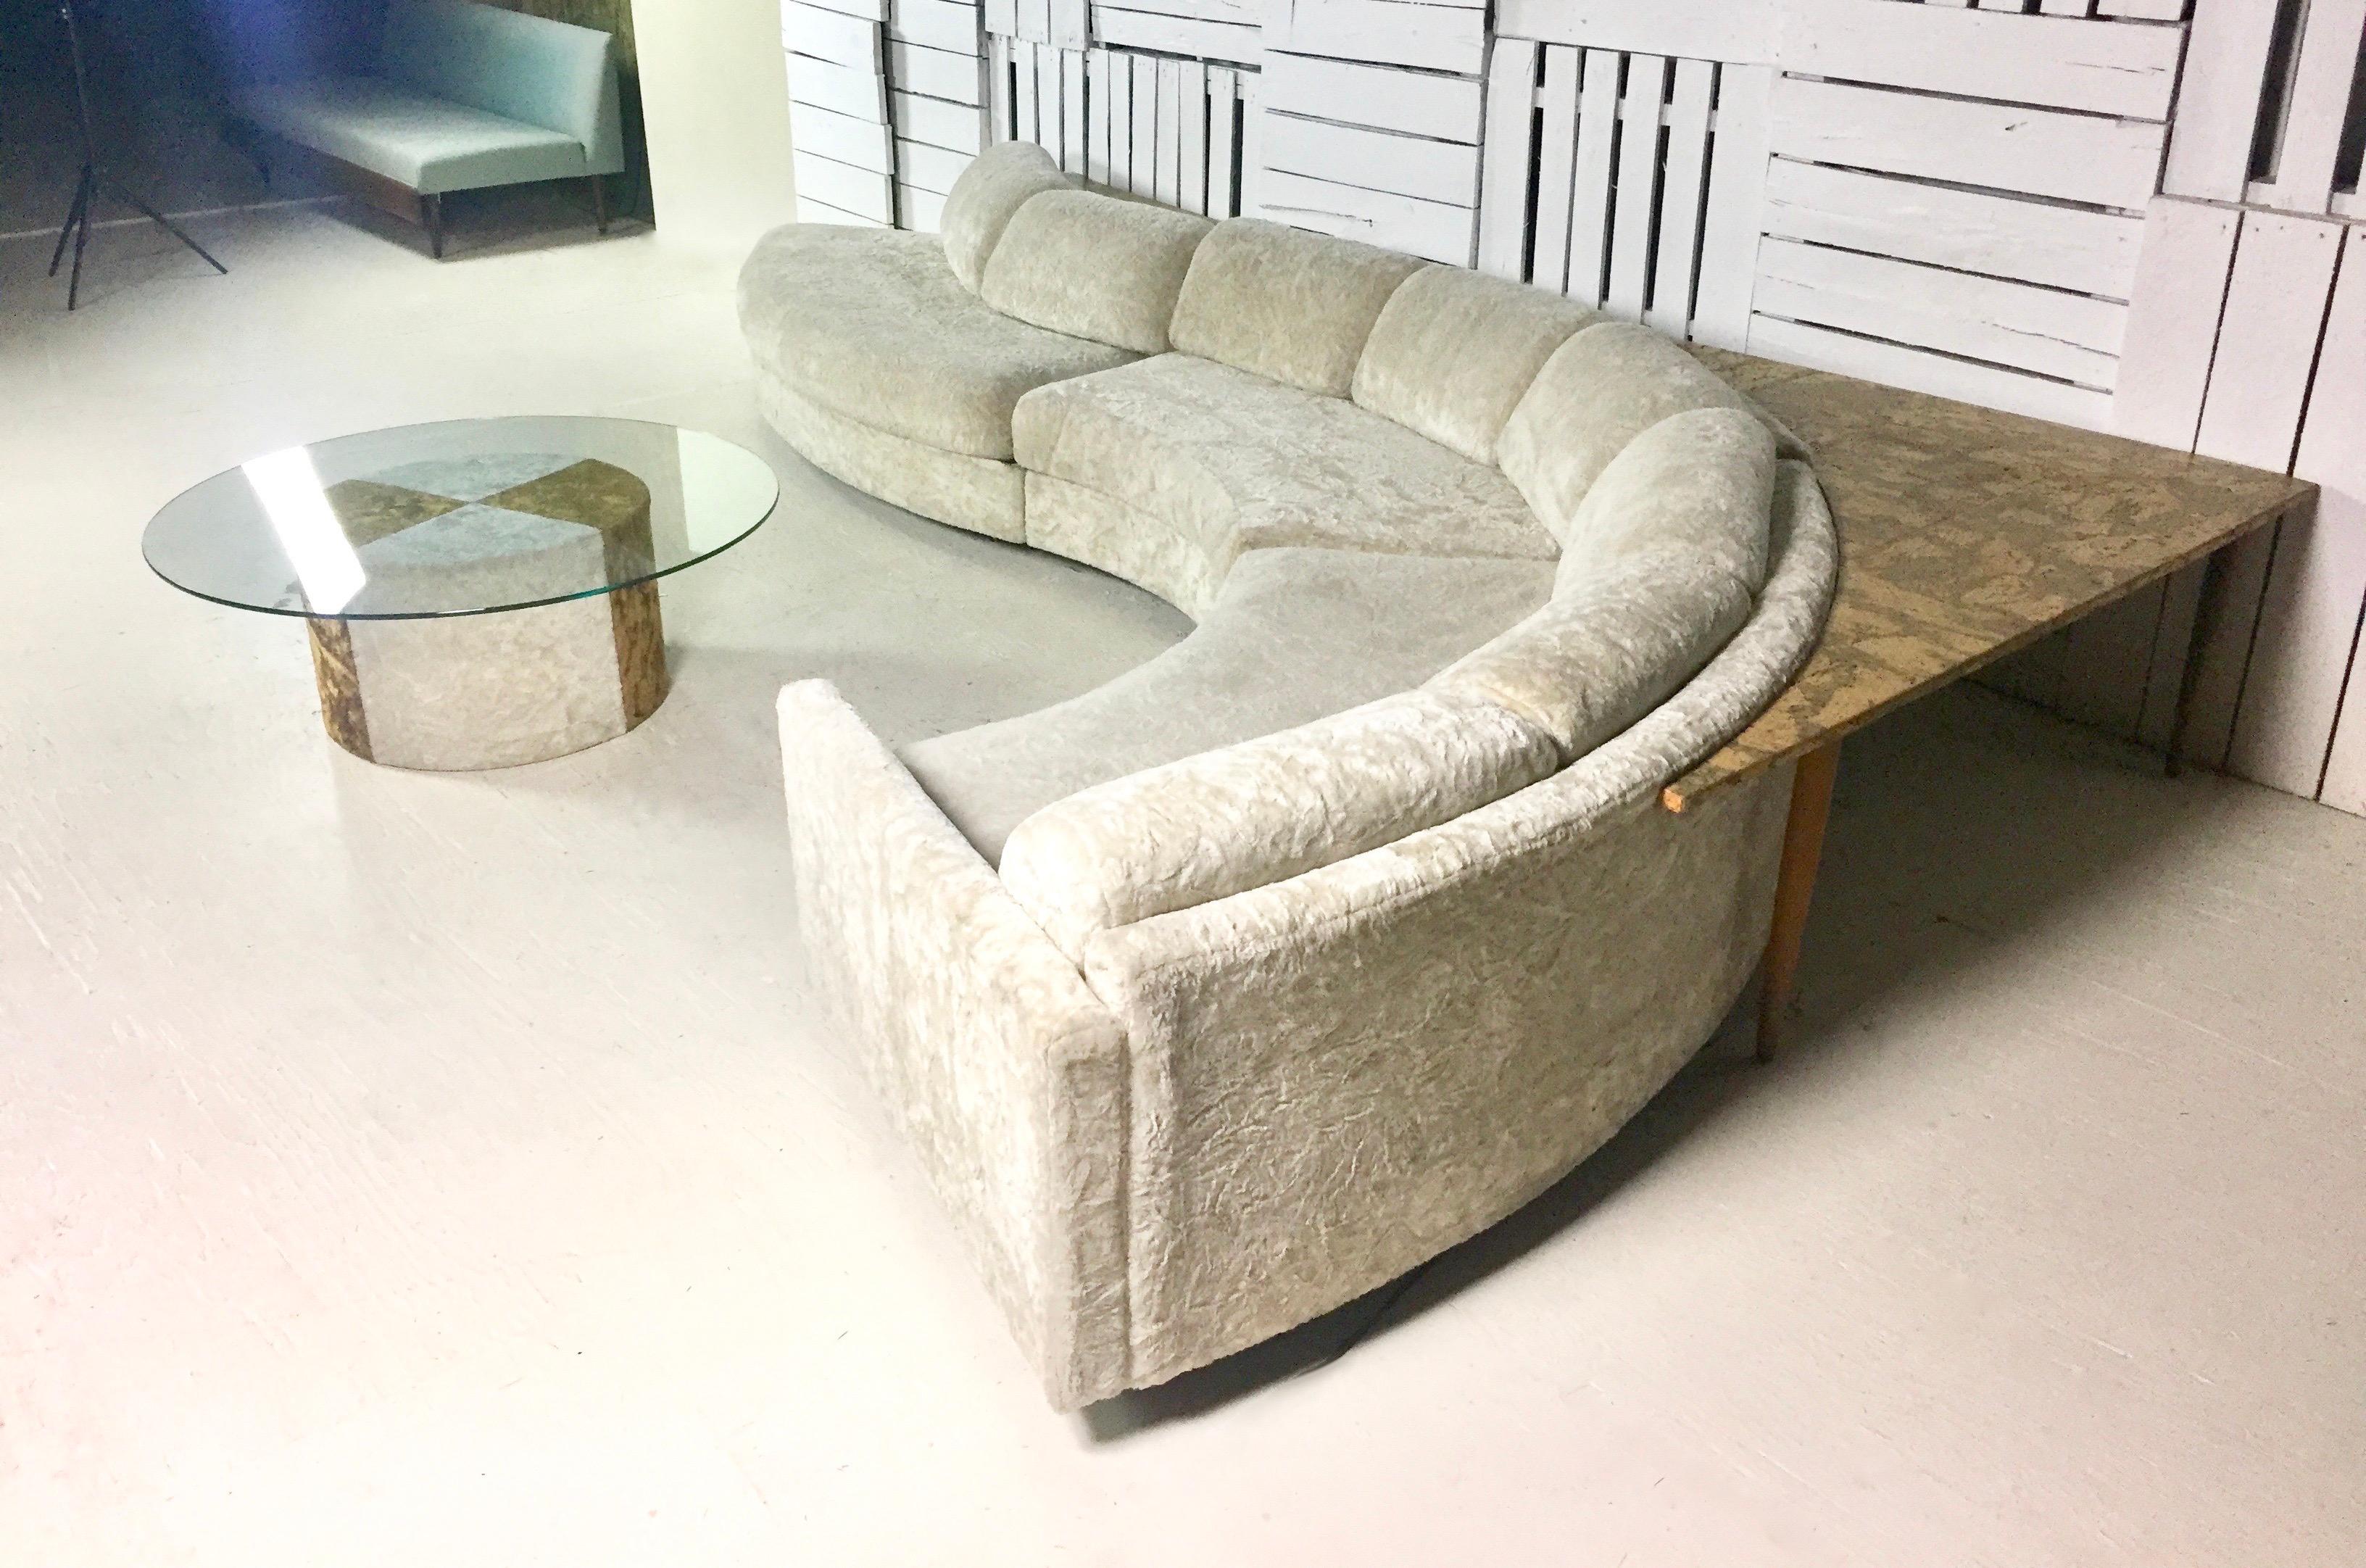 Late 20th Century Mid-Century Modern Signed Adrian Pearsall Curved Serpentine Sectional Sofa